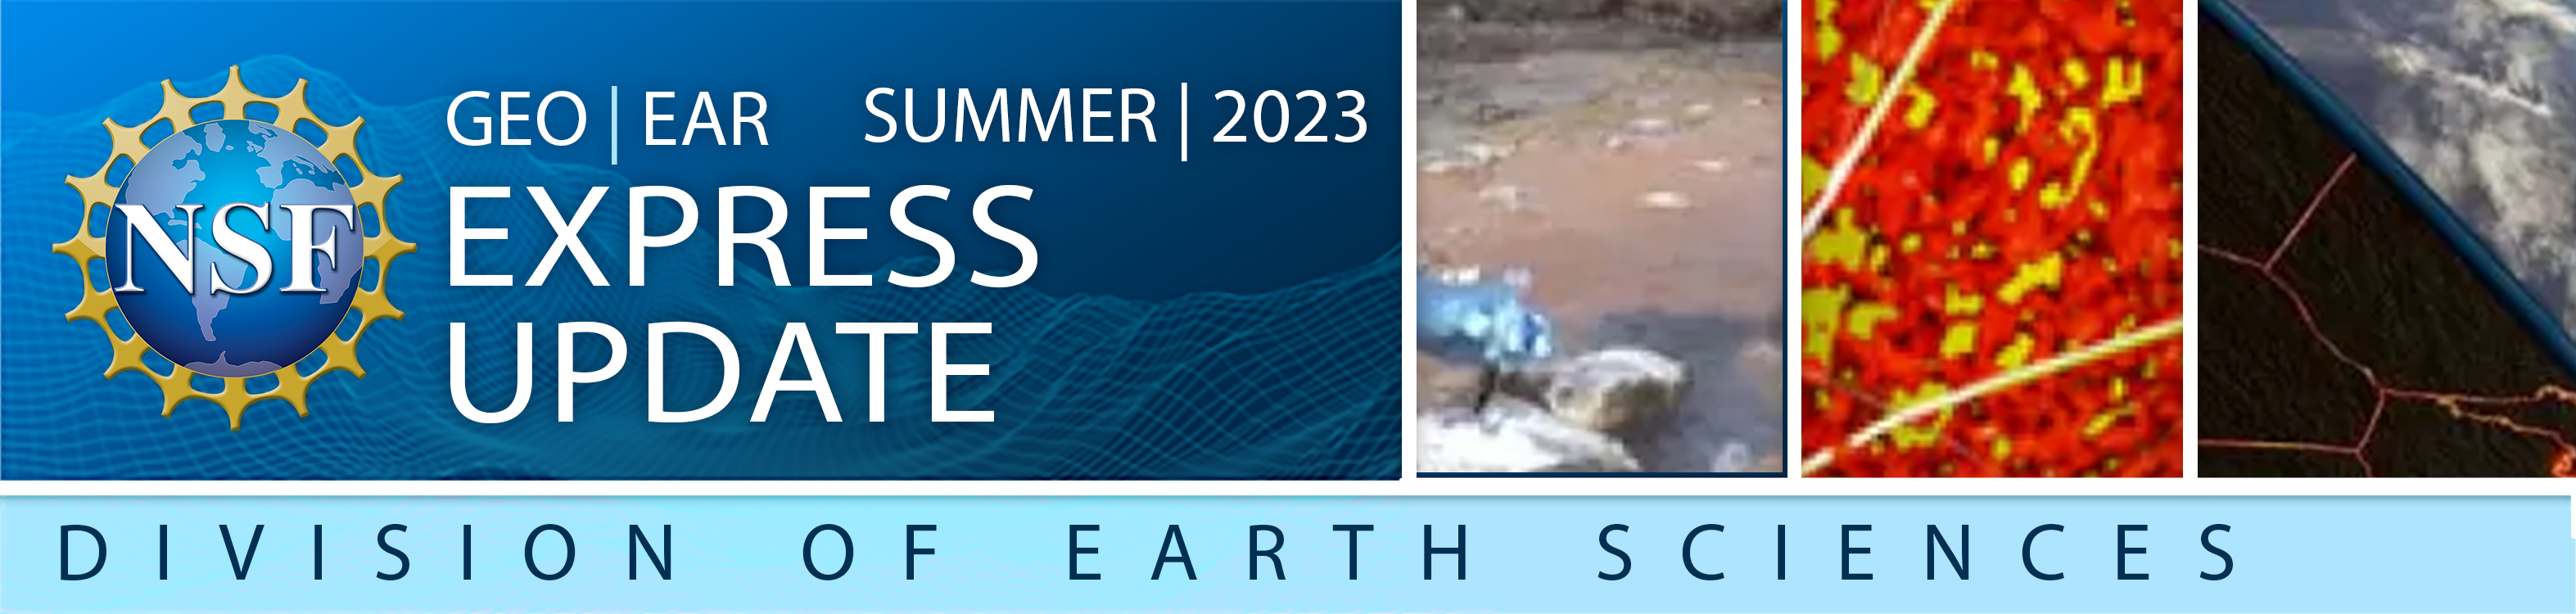 NSF Division of Earth Sciences Express Update Summer 2023 Banner